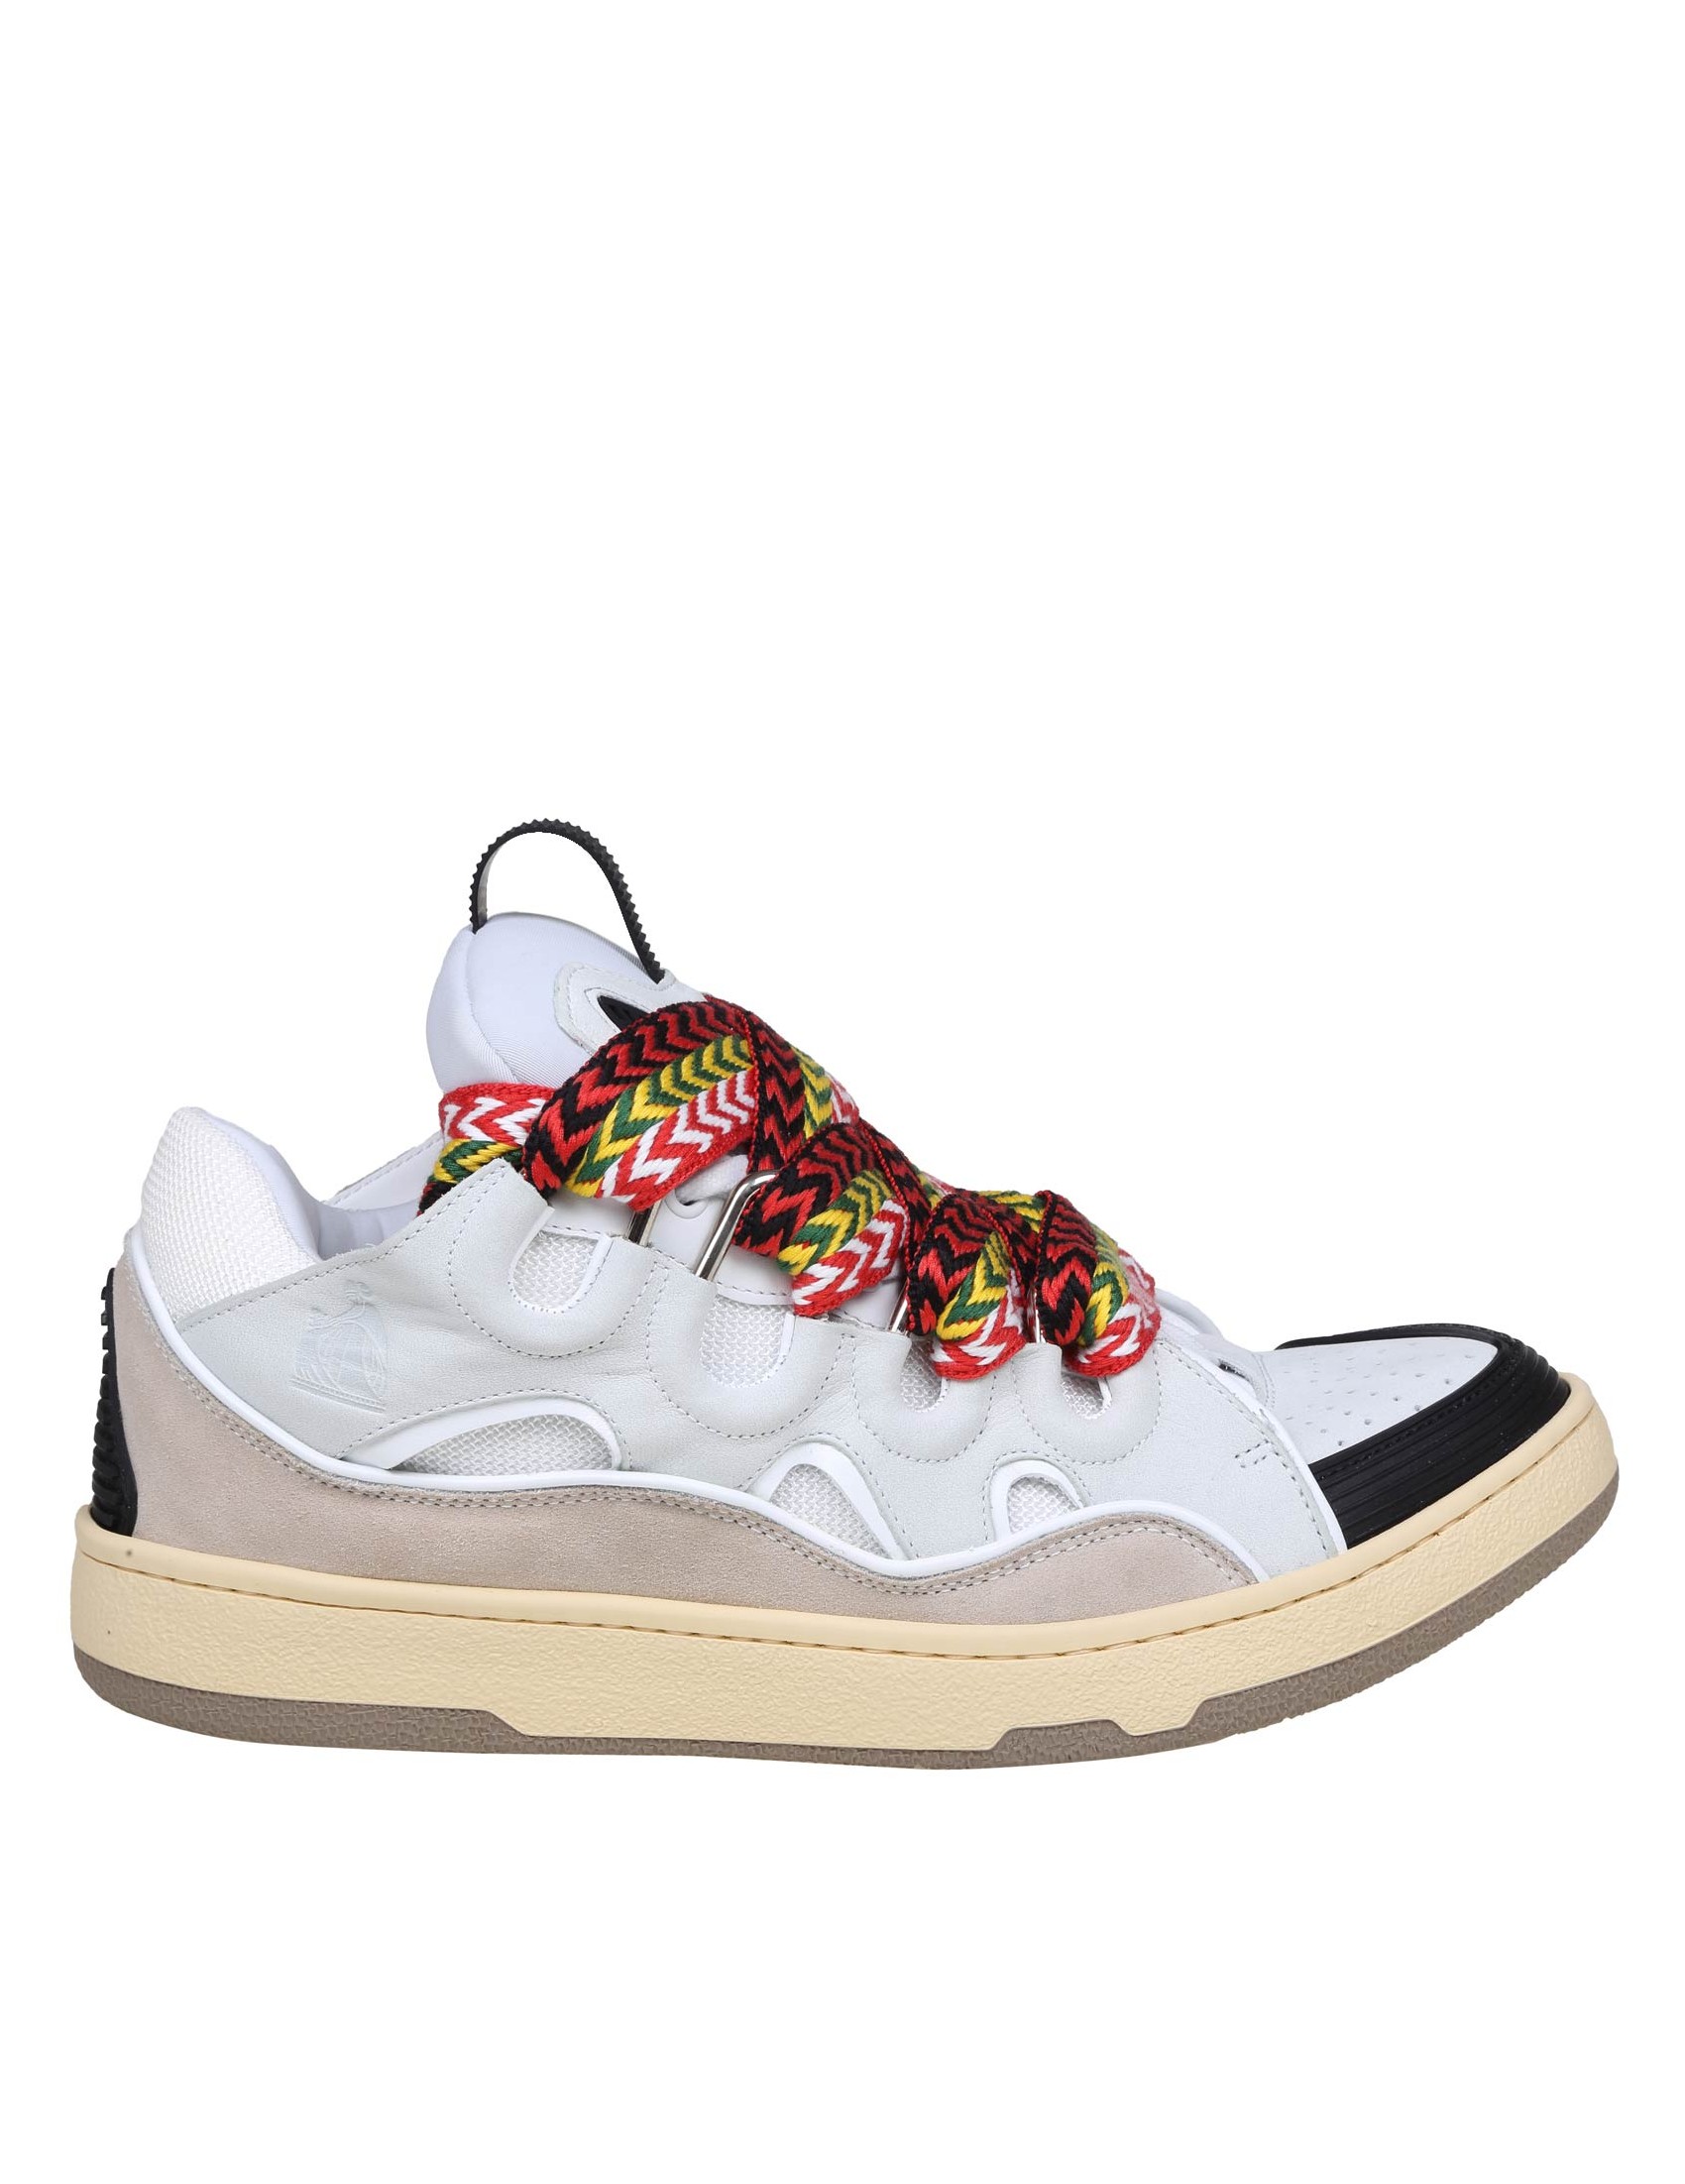 LANVIN CURB SNEAKERS IN LEATHER AND SUEDE WITH MULTICOLOR LACES